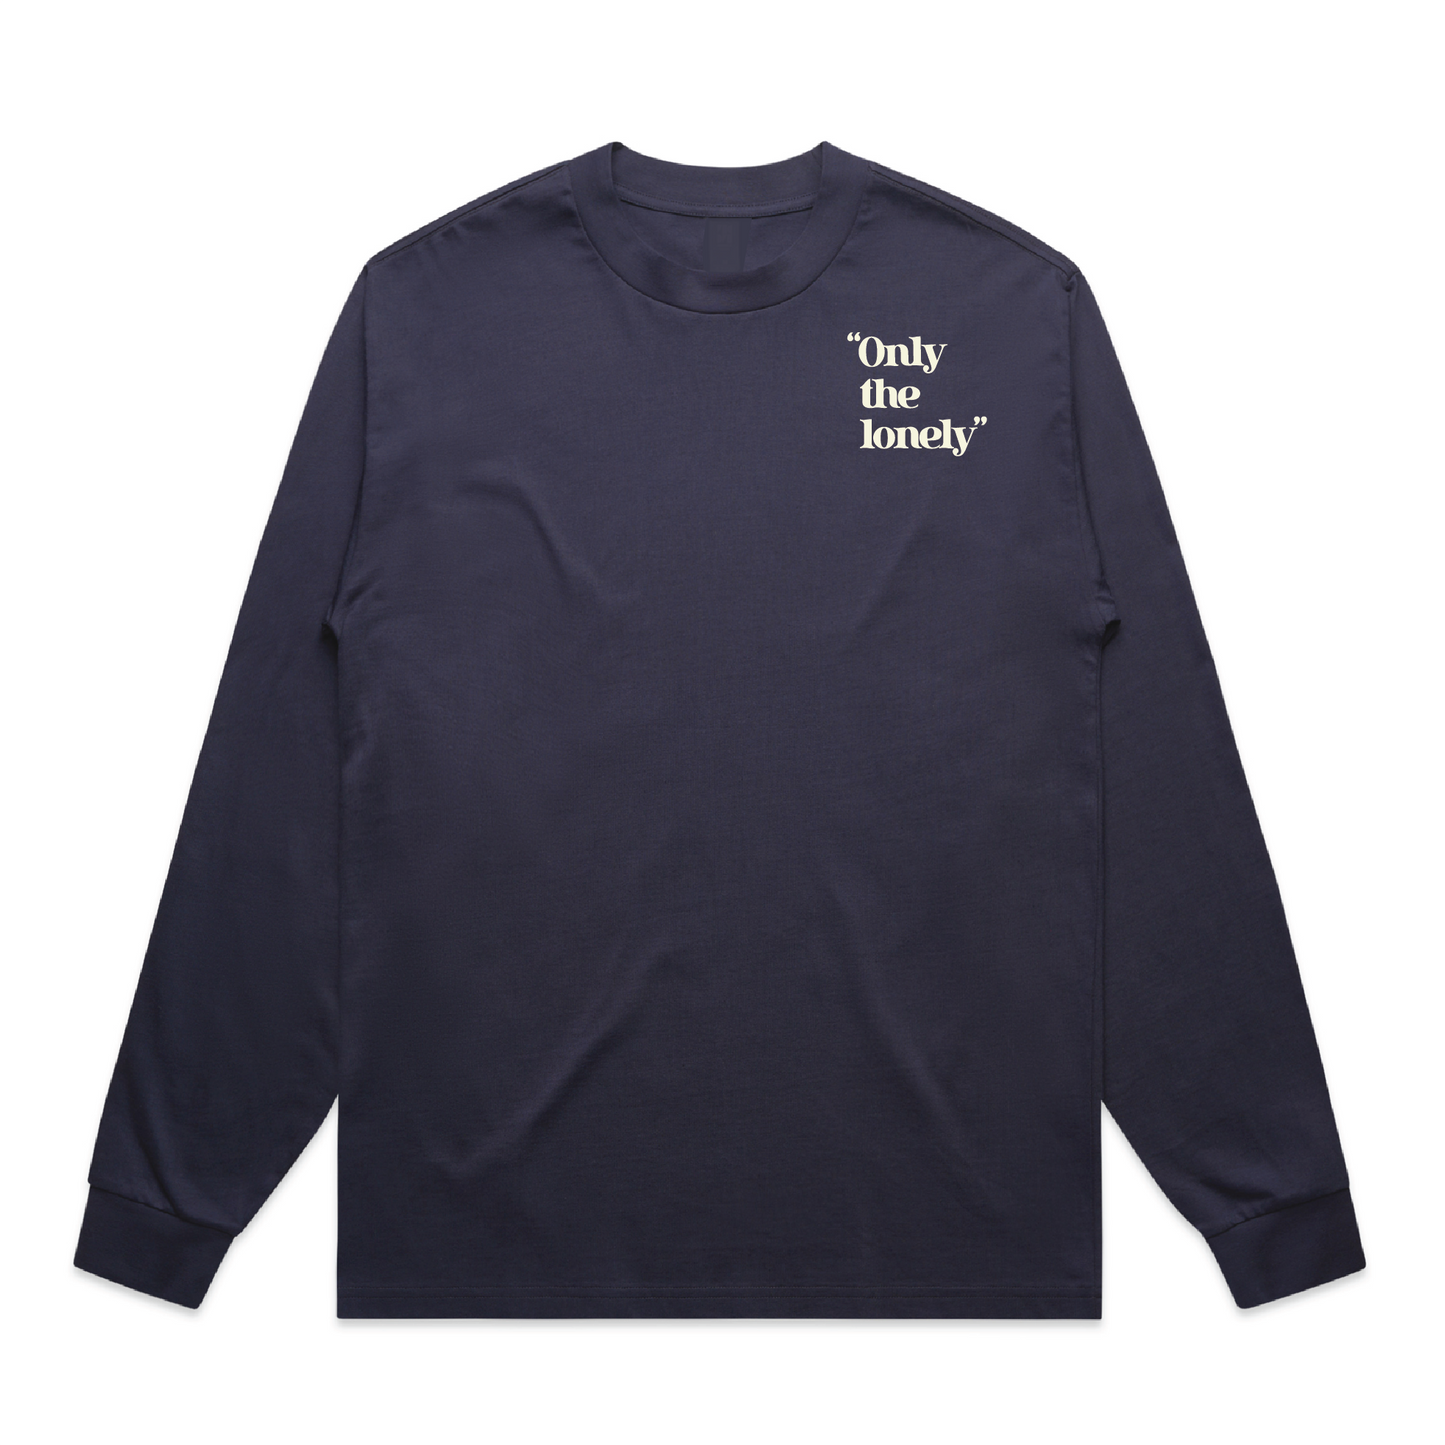 ONLY THE LONELY LOGO LONG SLEEVE T-SHIRT (NAVY/CREAM)